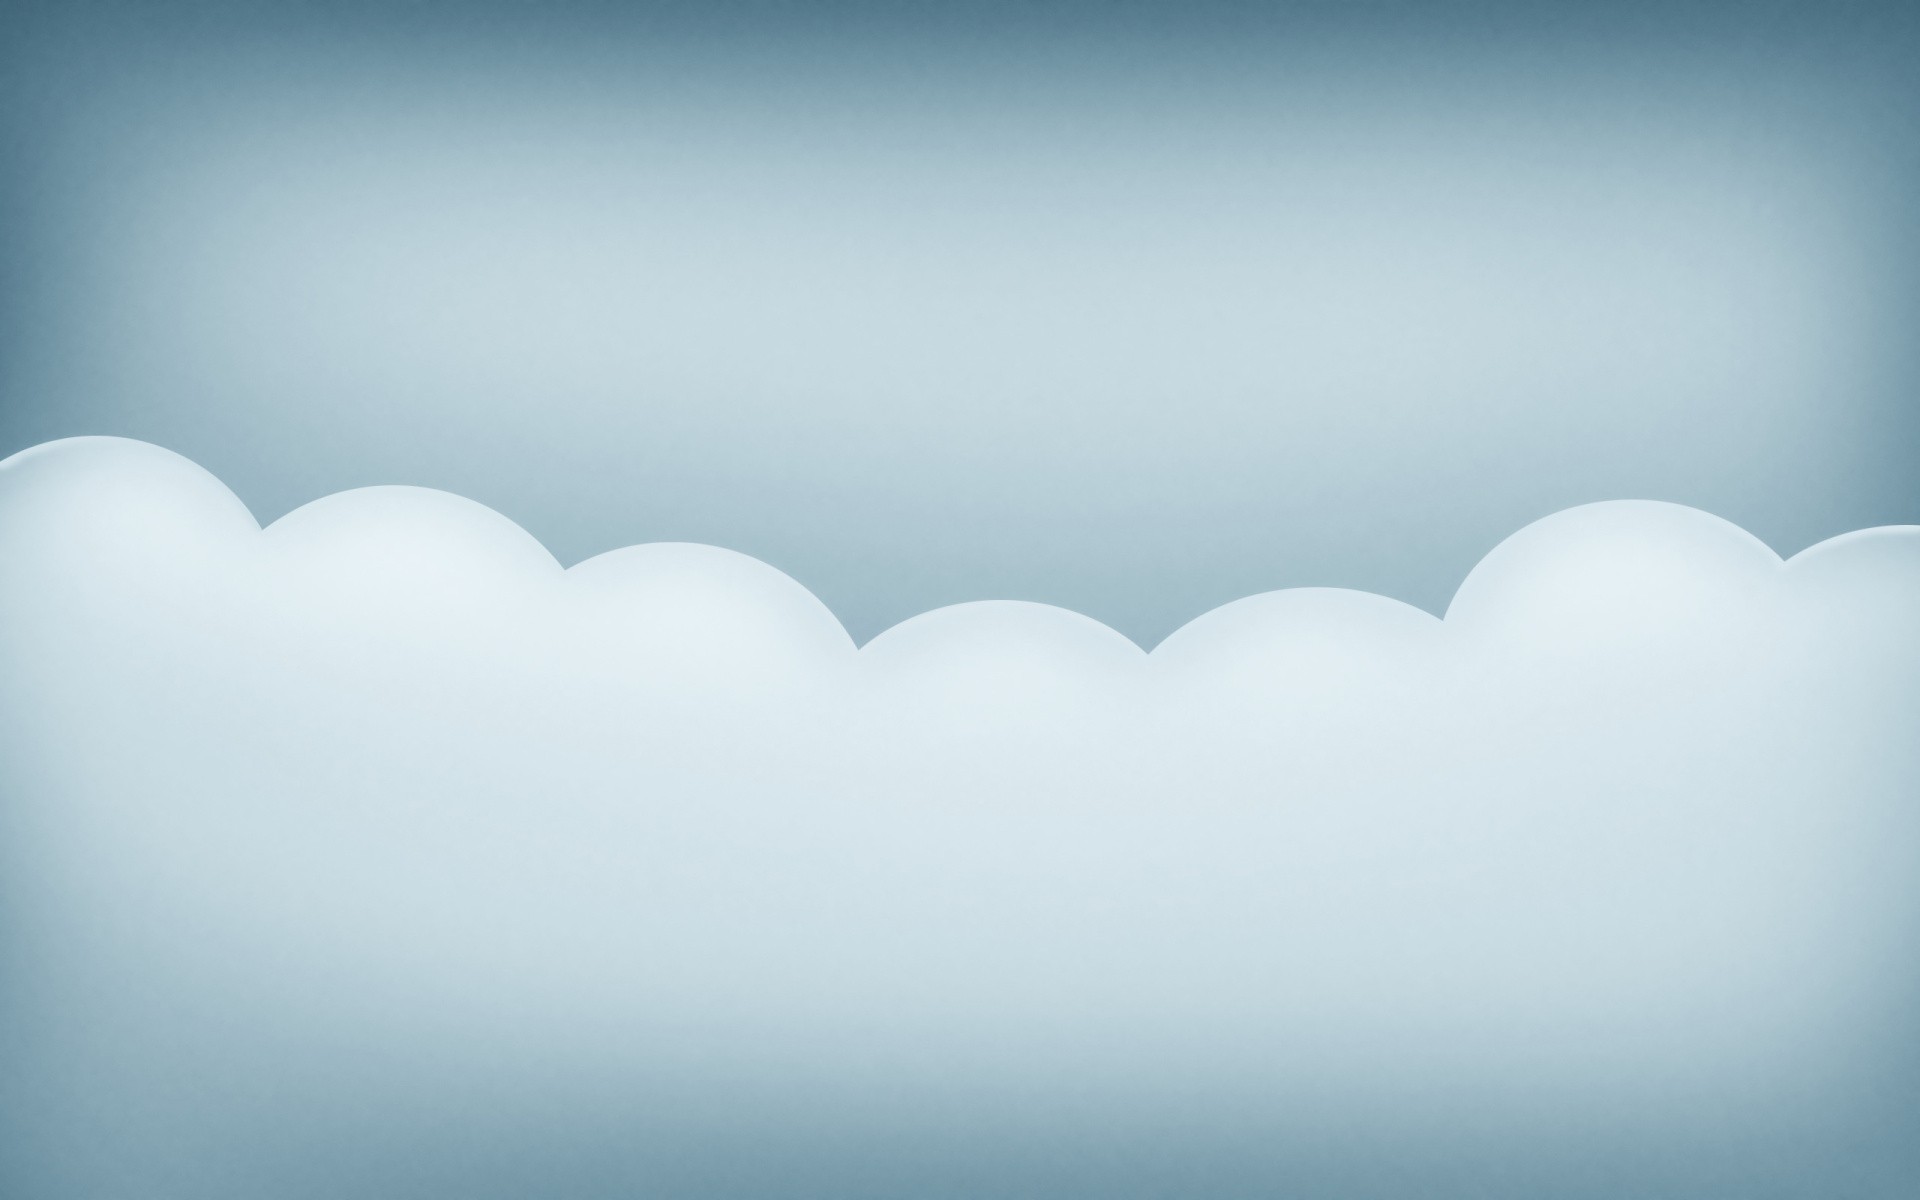 Abstract cartoon cloud art Free PPT Backgrounds for your PowerPoint